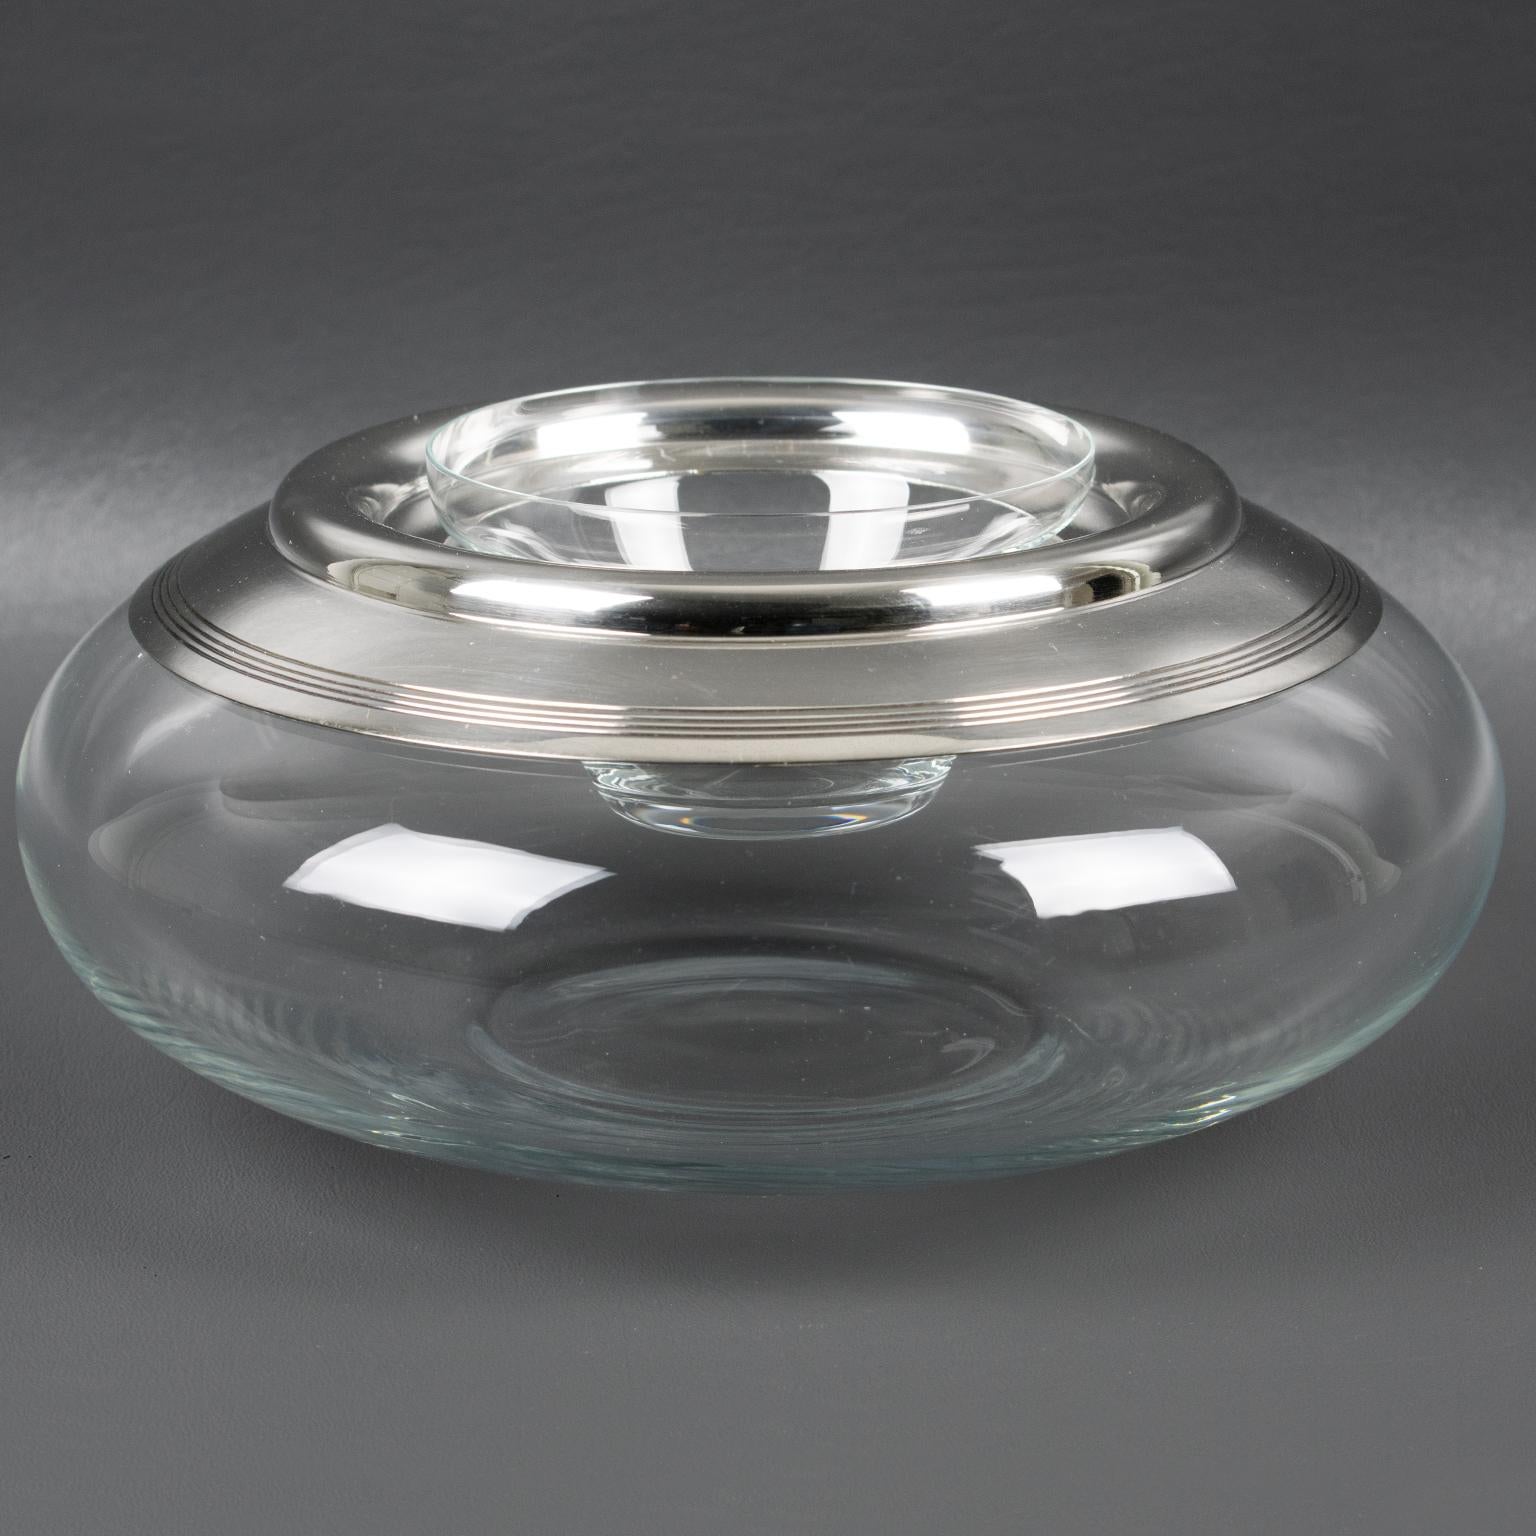 Mid-20th Century Silver Plate and Crystal Caviar Bowl Dish Server by St Hilaire France, 1960s